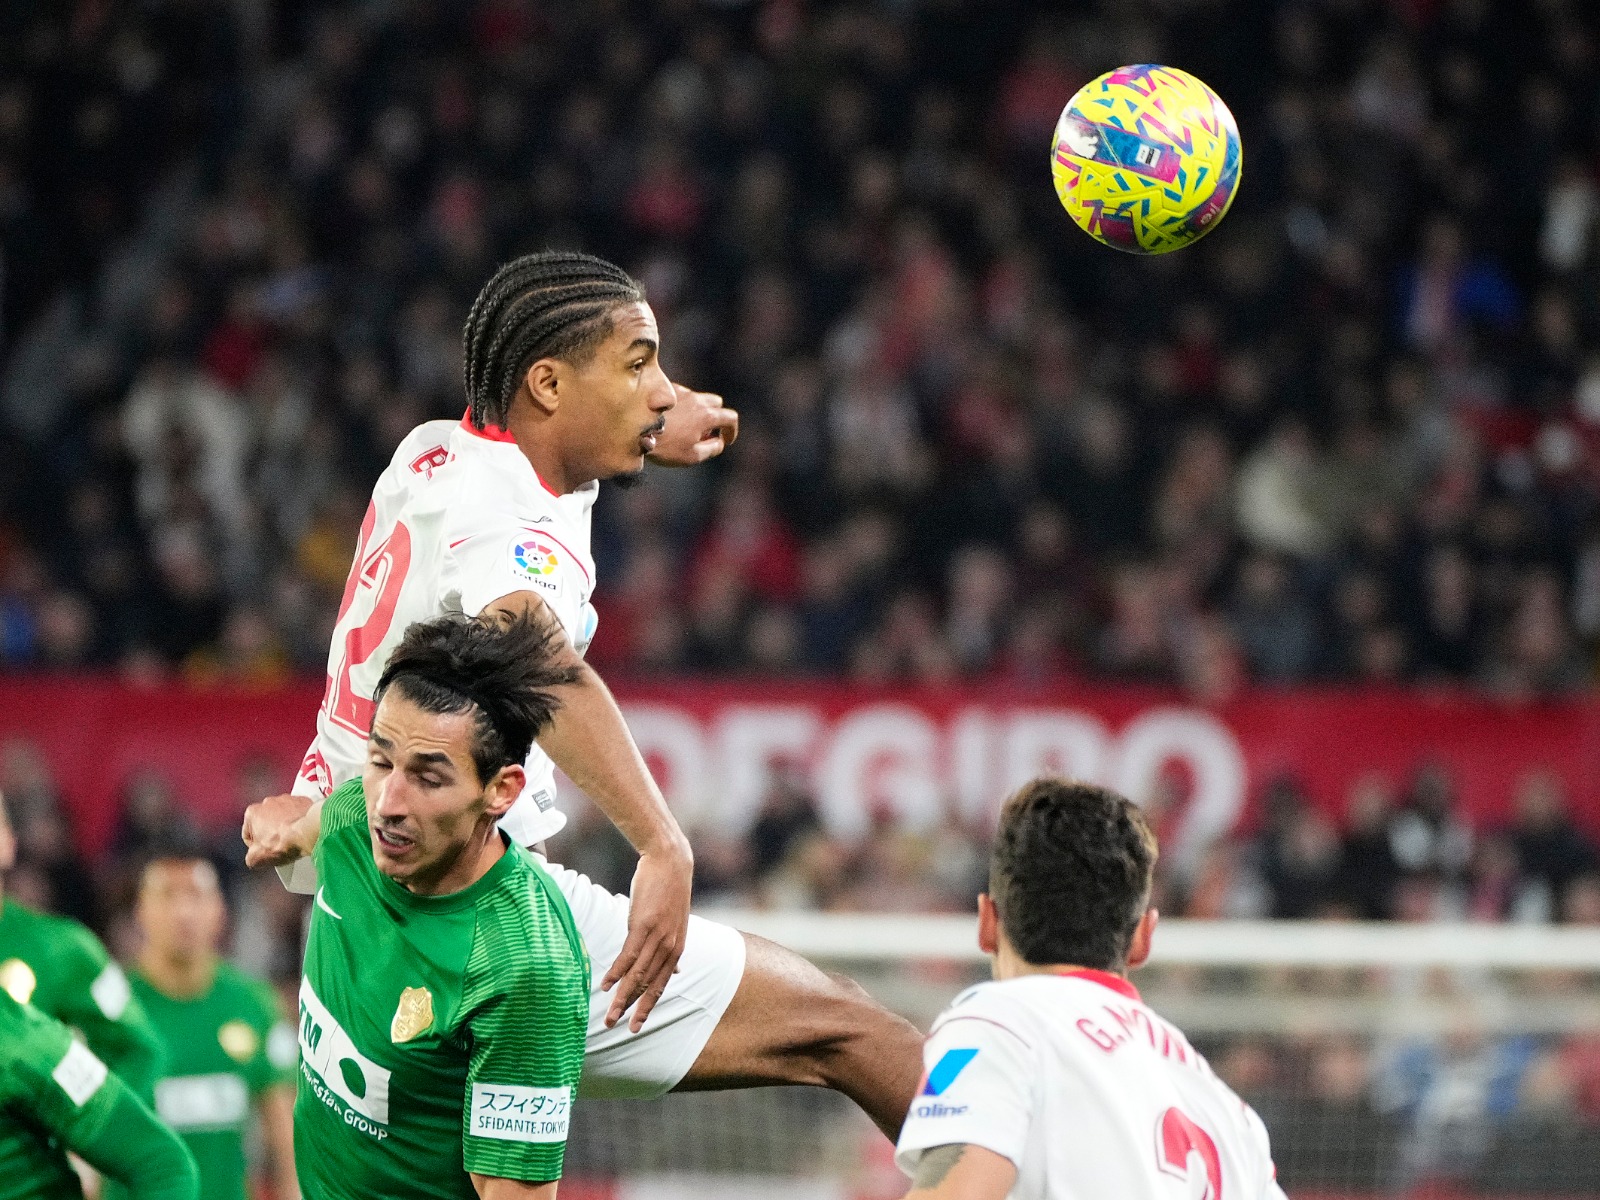 A defensive action shot during the game between Sevilla FC and Elche CF